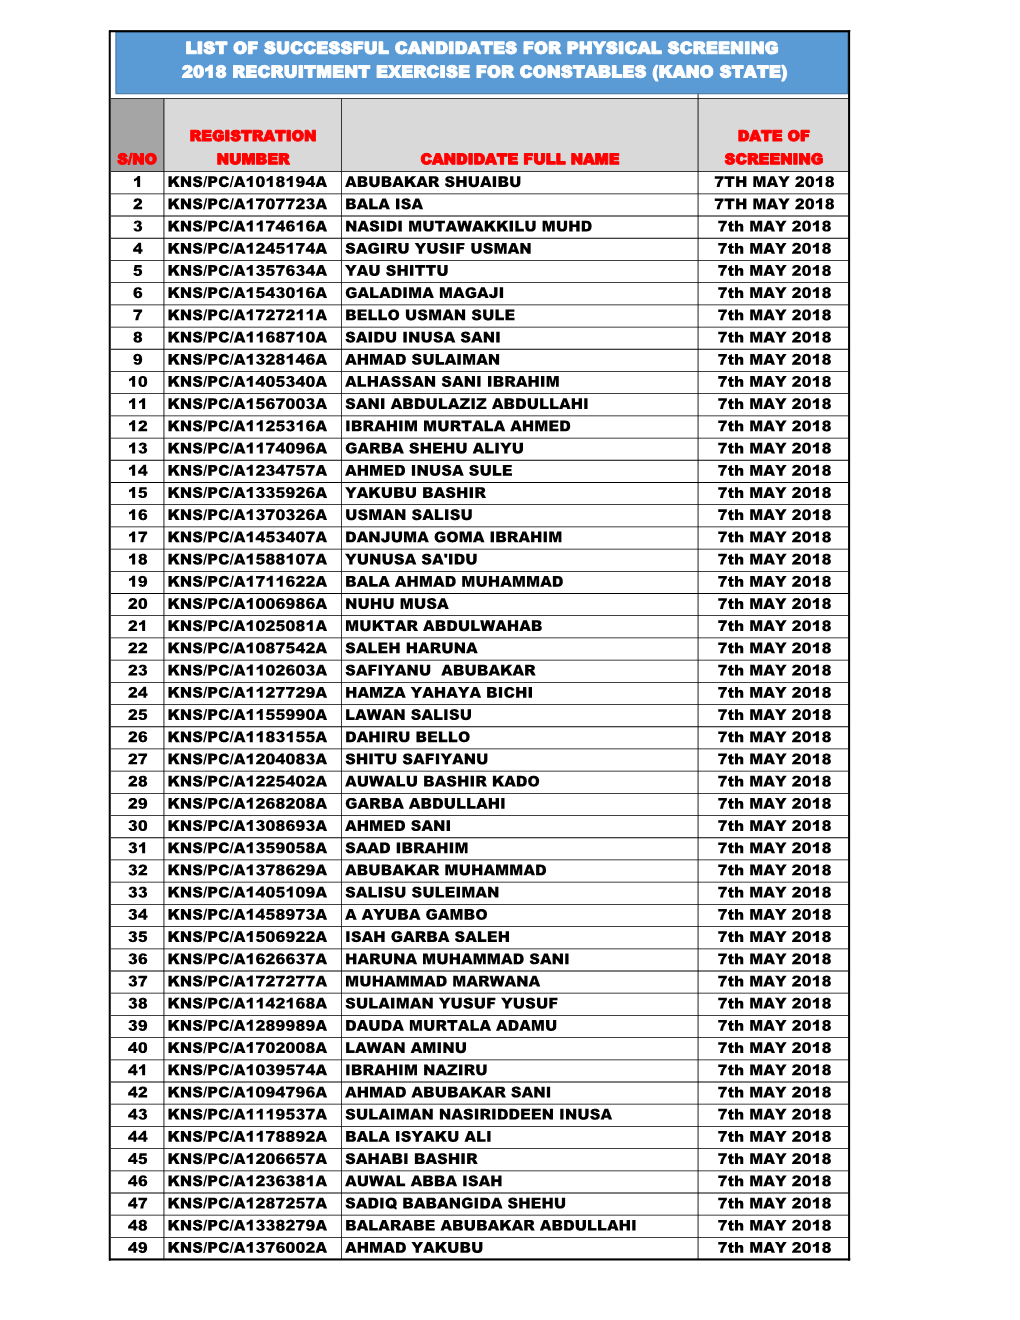 List of Successful Candidates for Physical Screening 2018 Recruitment Exercise for Constables (Kano State)